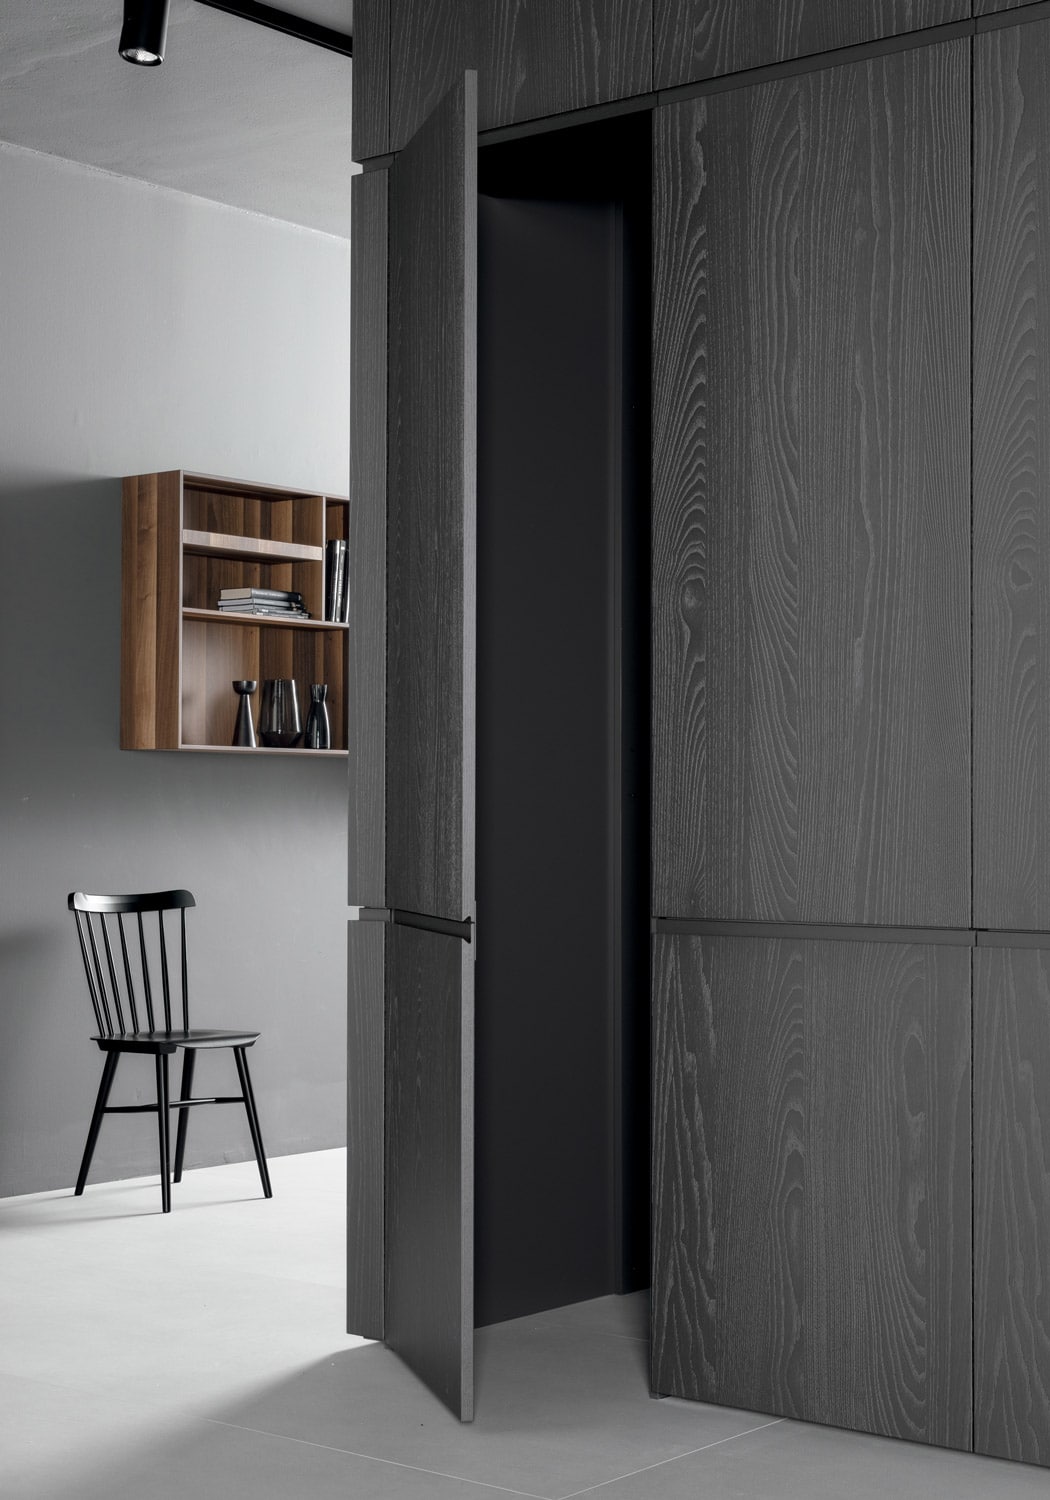 On the other side of the tall units, a door gives access to a hidden pantry. The door and the panels of this section are finished in Titanium stained Walnut to create aesthetic continuity.